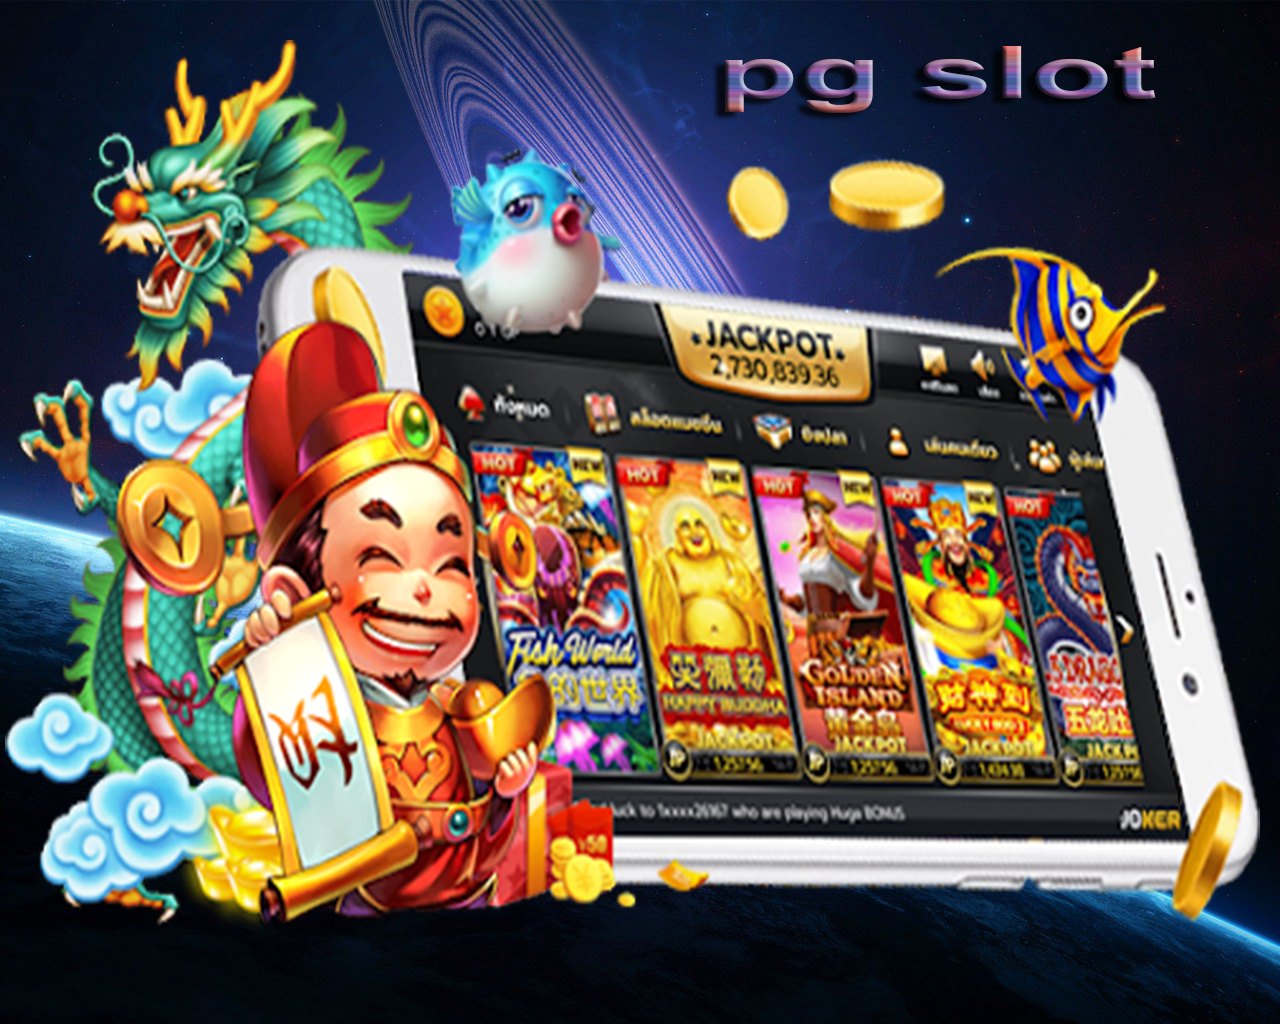 PG Slot Online Betting: Numerous Games Options and Exciting Rewards